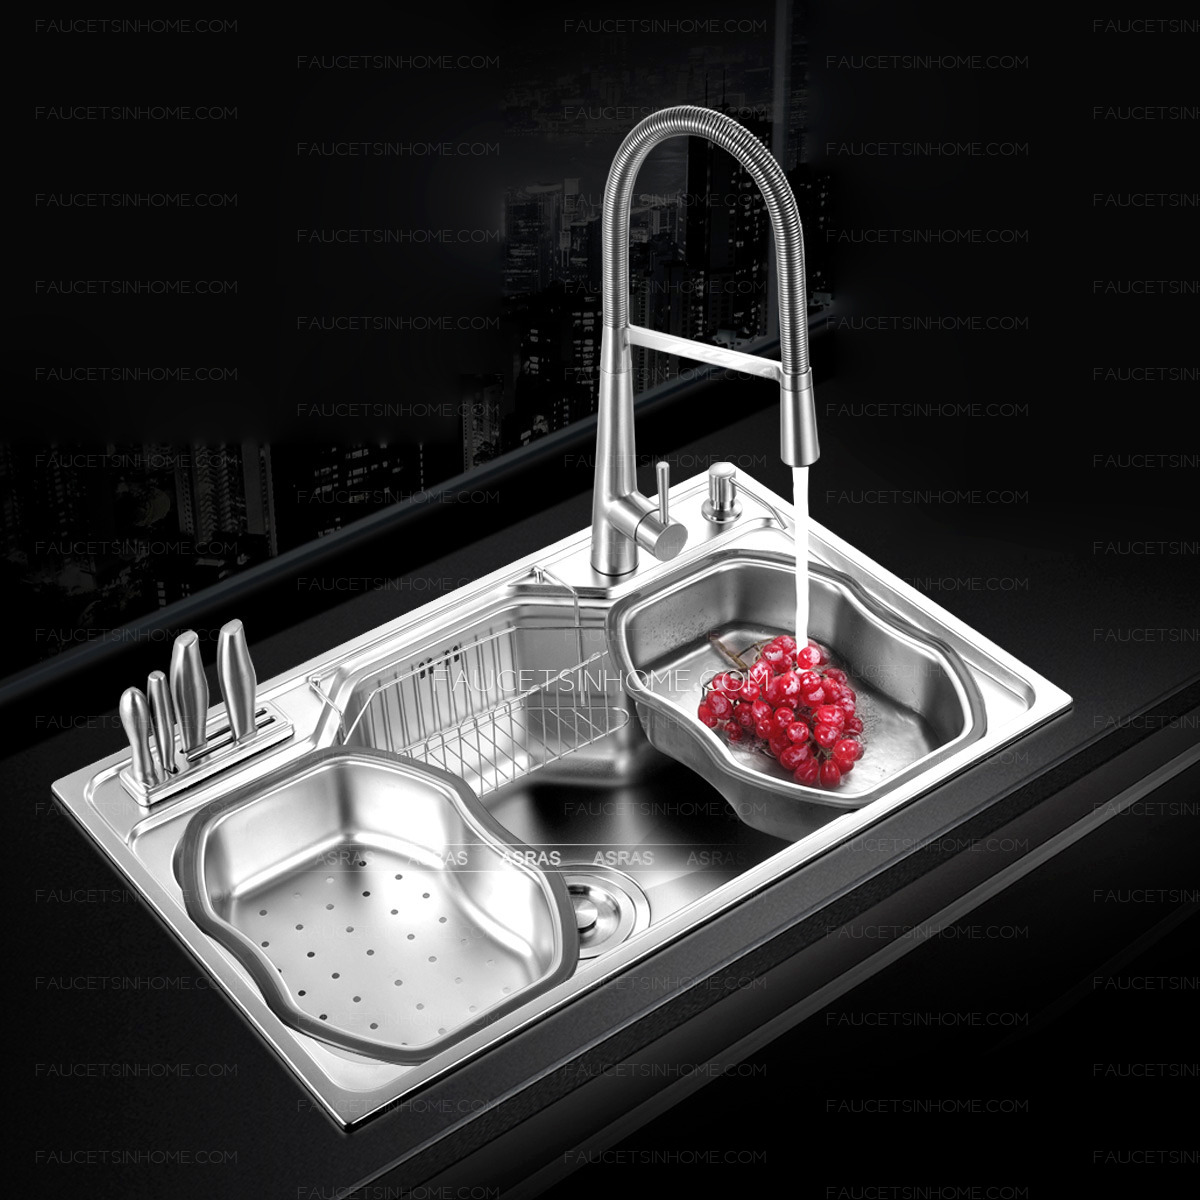 Practical Large Capacity Single Bowl Stainless Steel Kitchen Sinks